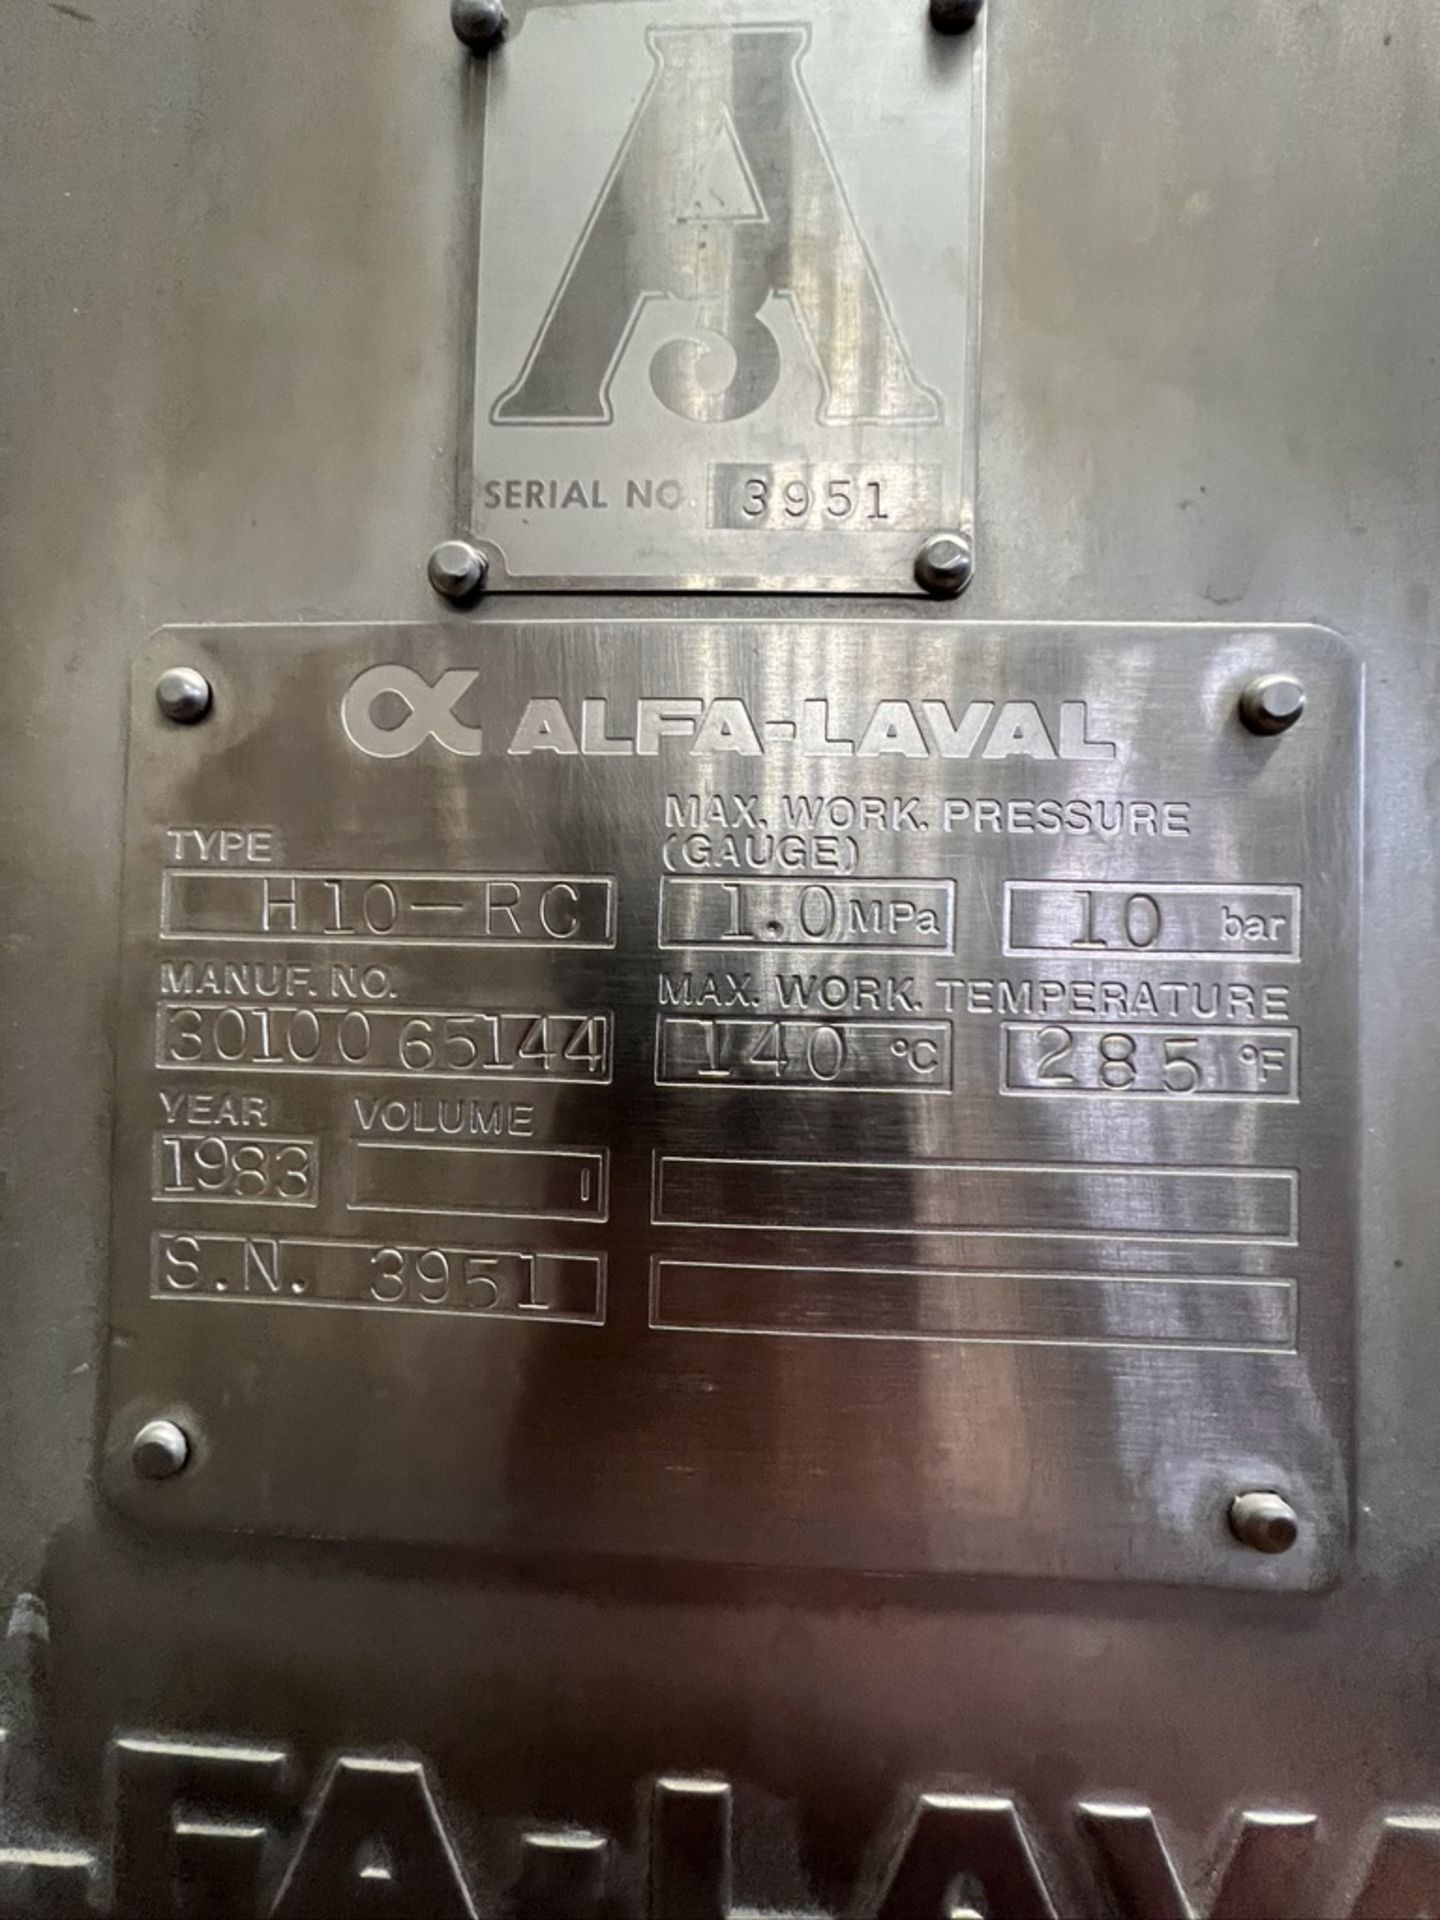 ALFA LAVAL PLATE FRAME HEAT EXCHANGER, TYPE H10-RC, S/N 3951  TYPE H10-RC, S/N 3951 (INV#87396)( - Image 4 of 4